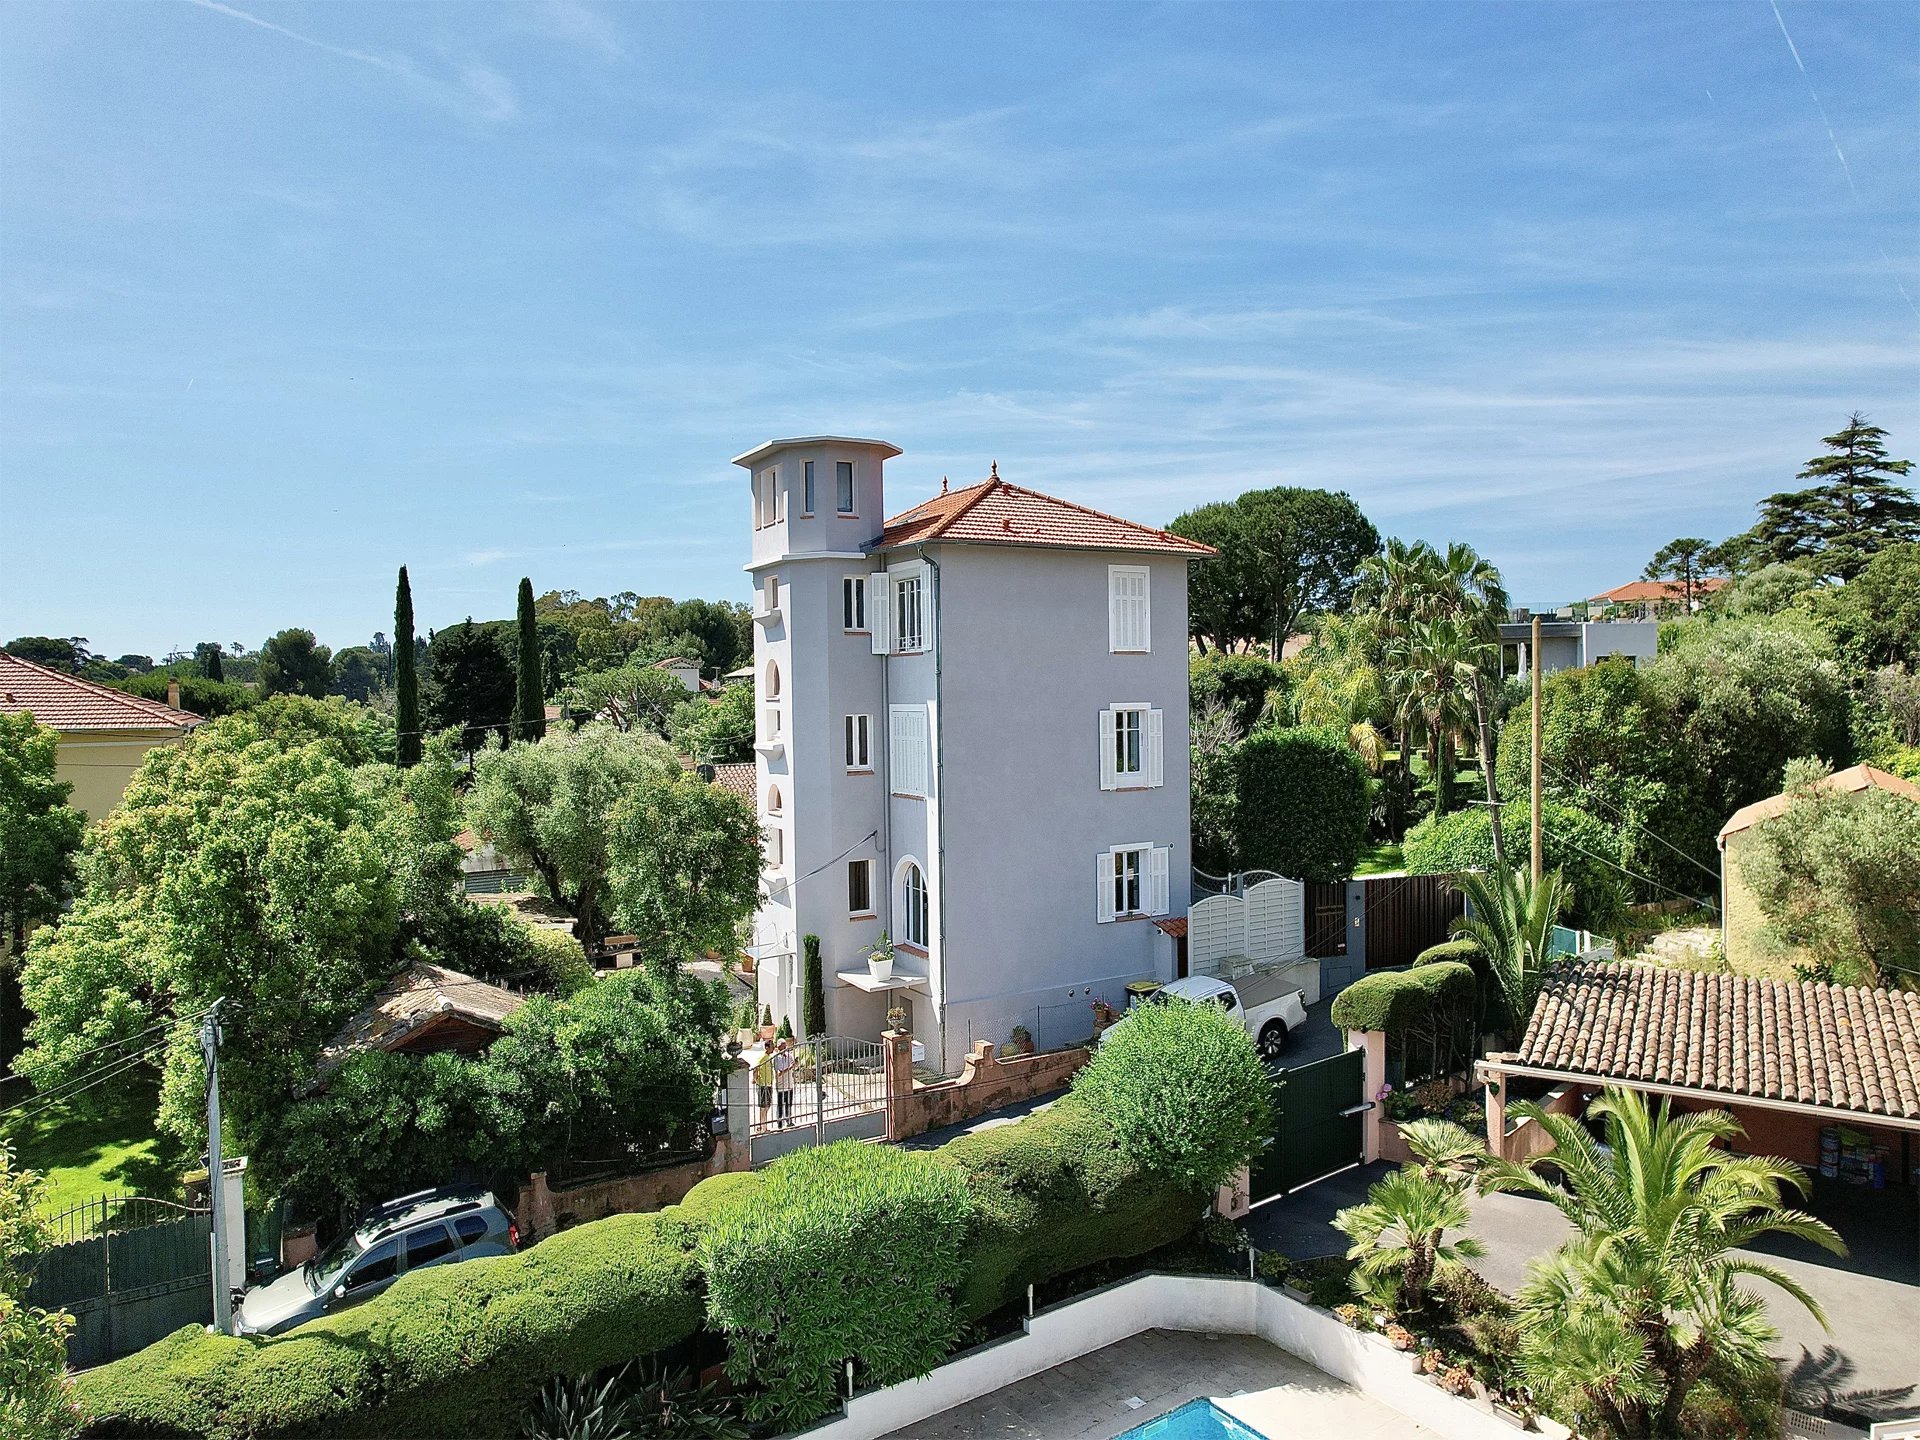 The charm of authenticity at Cap d'Antibes